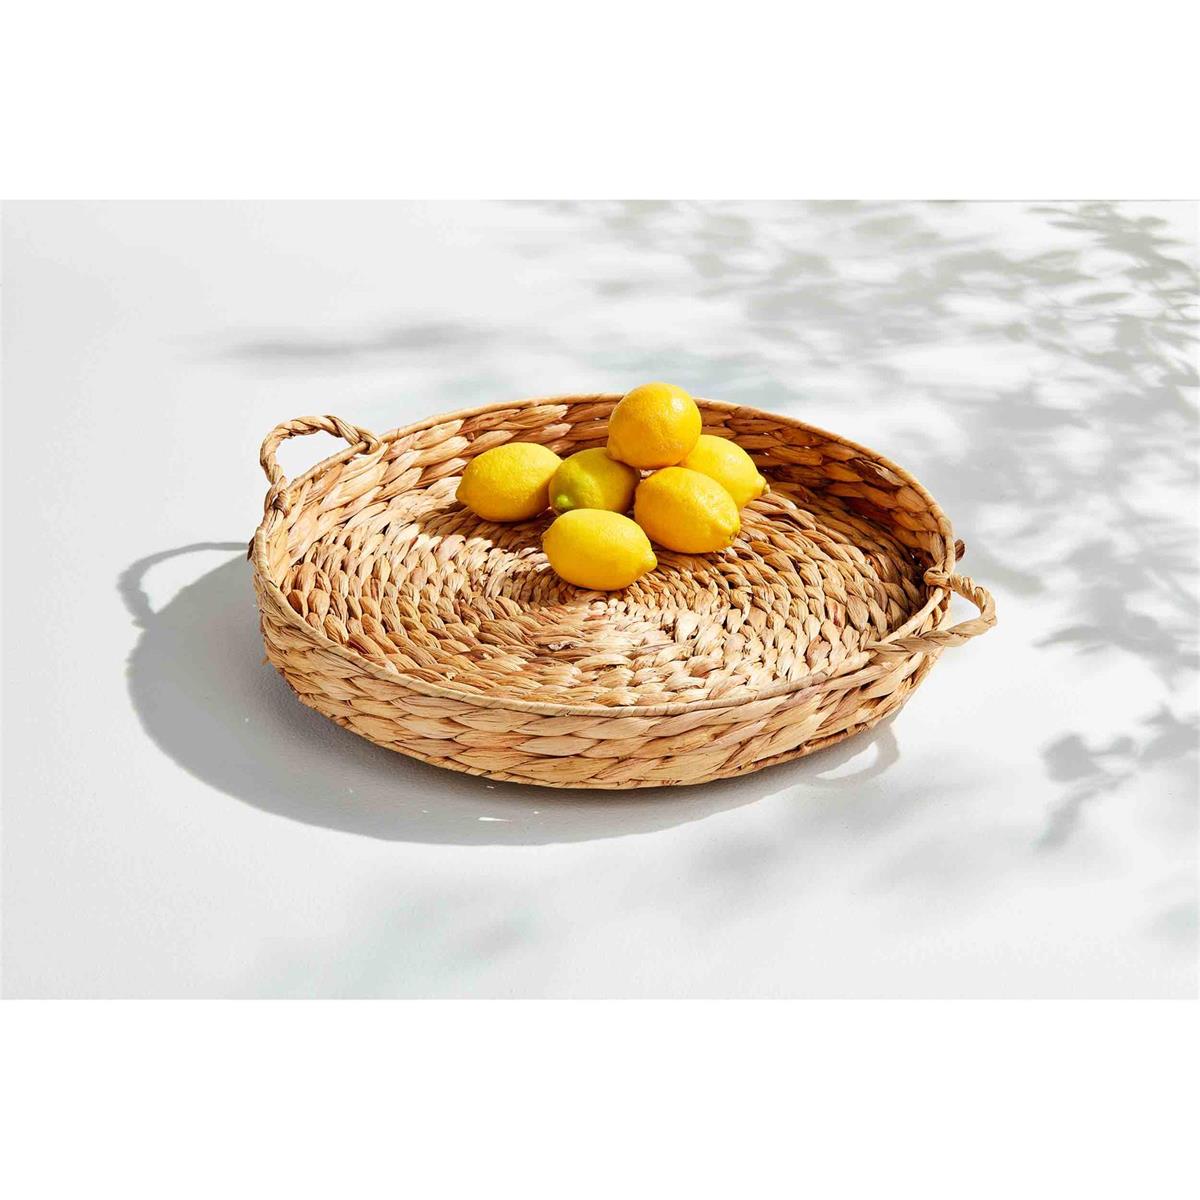 woven lazy susan with handles partially filled with lemons on a white surface outside with shadows of leaves